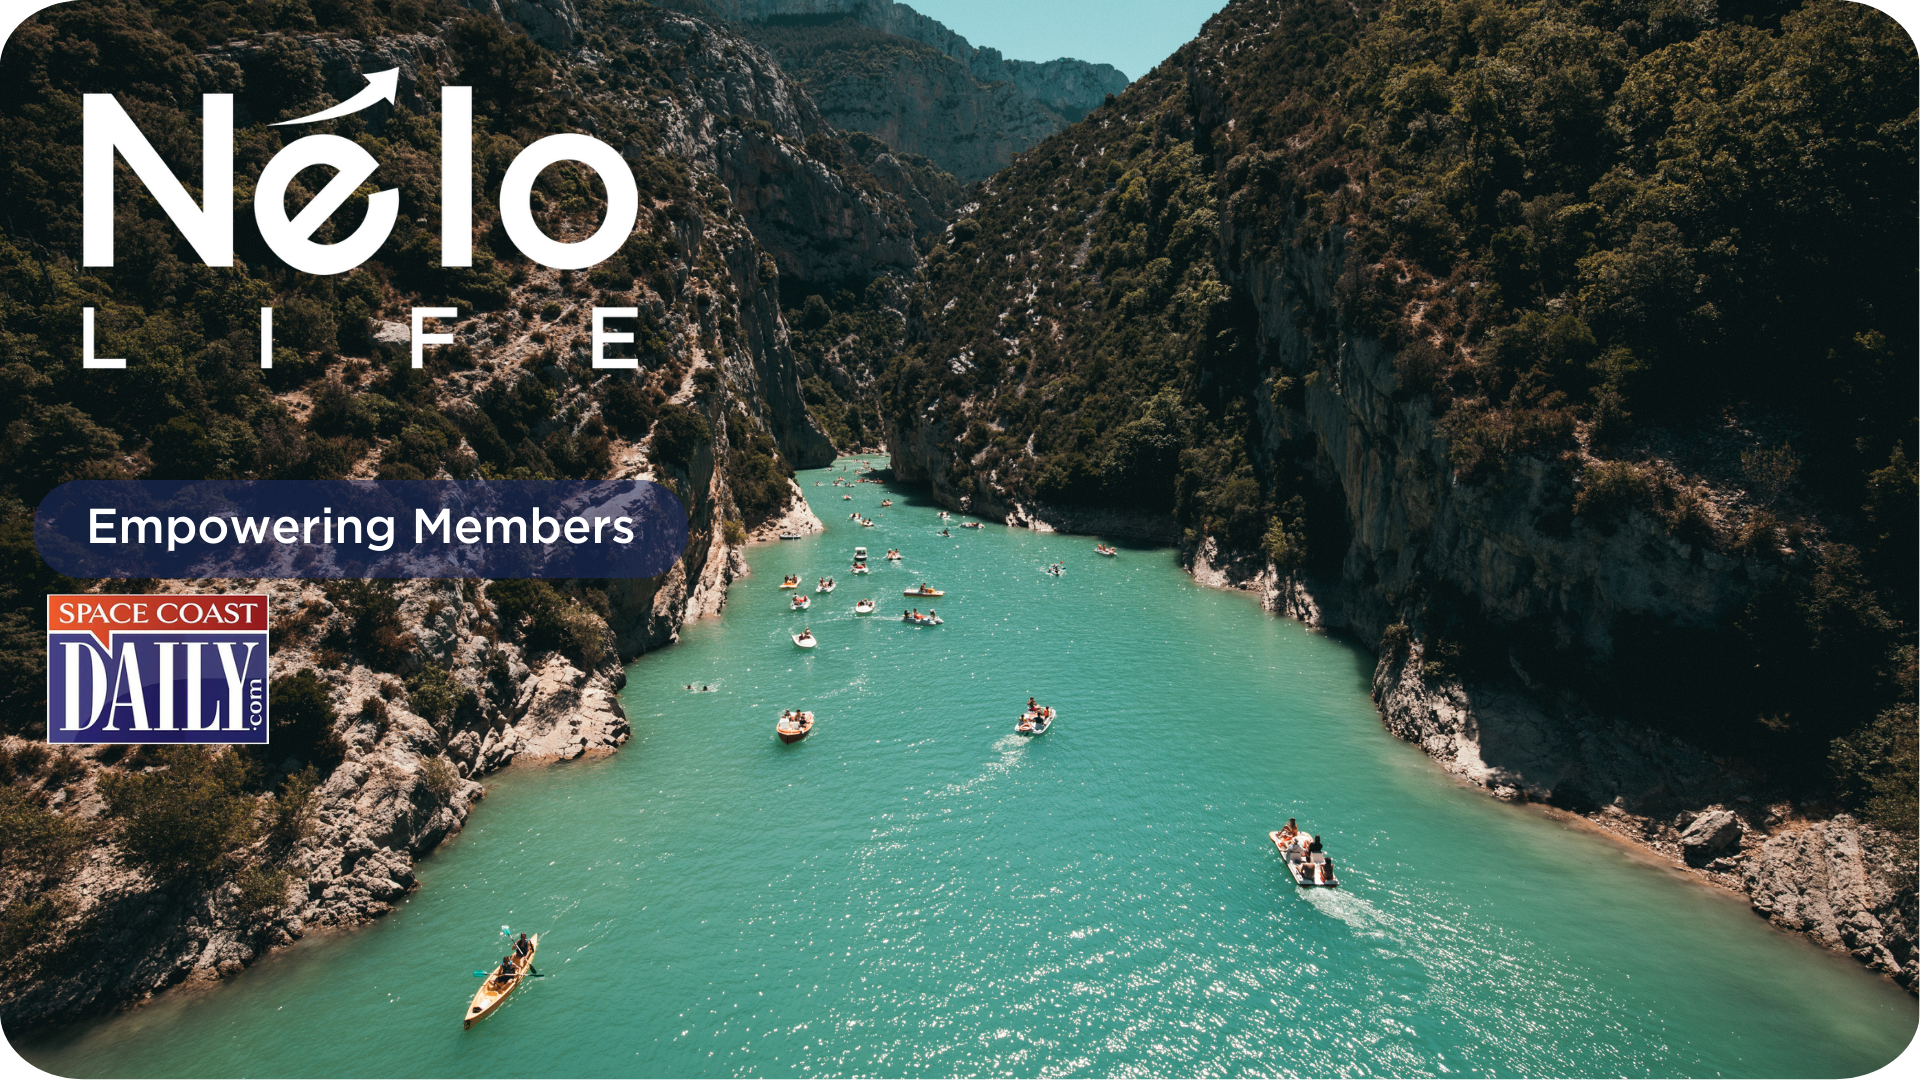 Nelo Life Empowers Members to Travel and Earn with Unique Membership Program